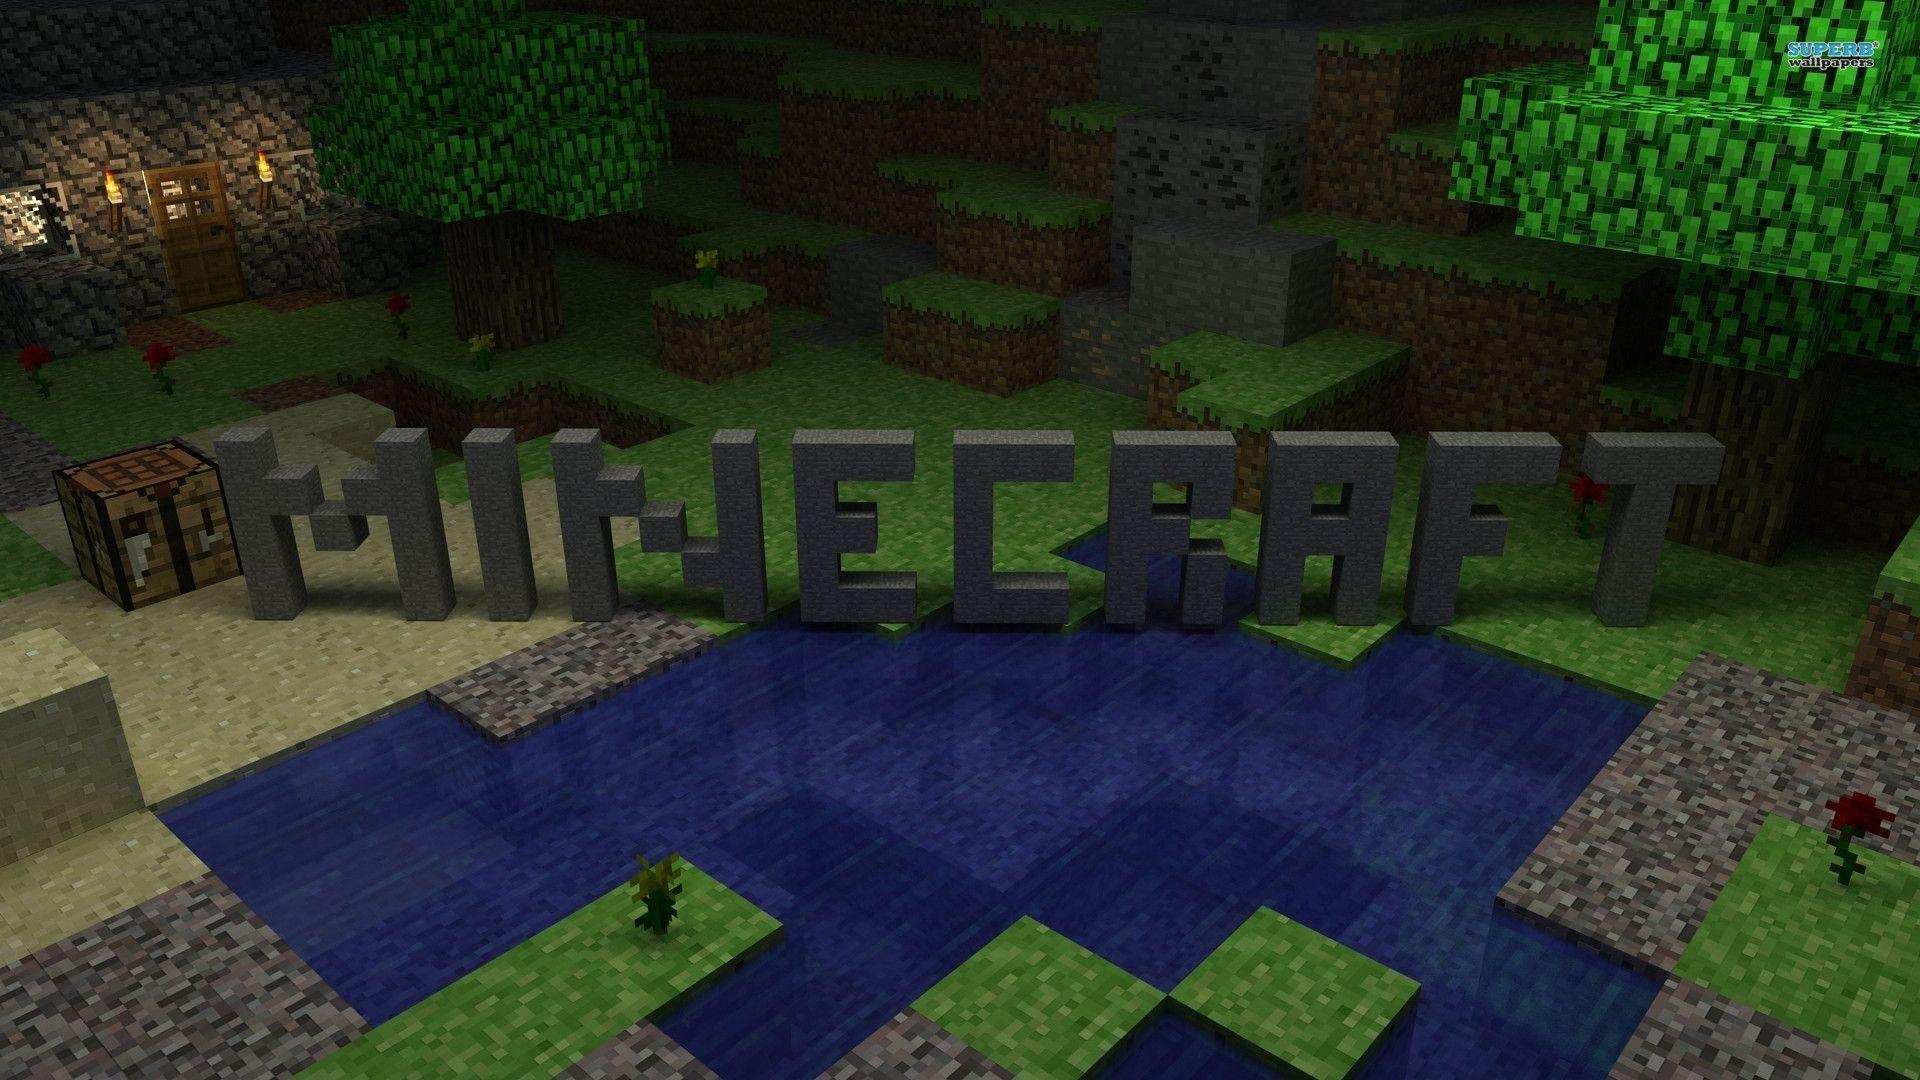 Wallpapers For > Minecraft Wallpapers 1920x1080